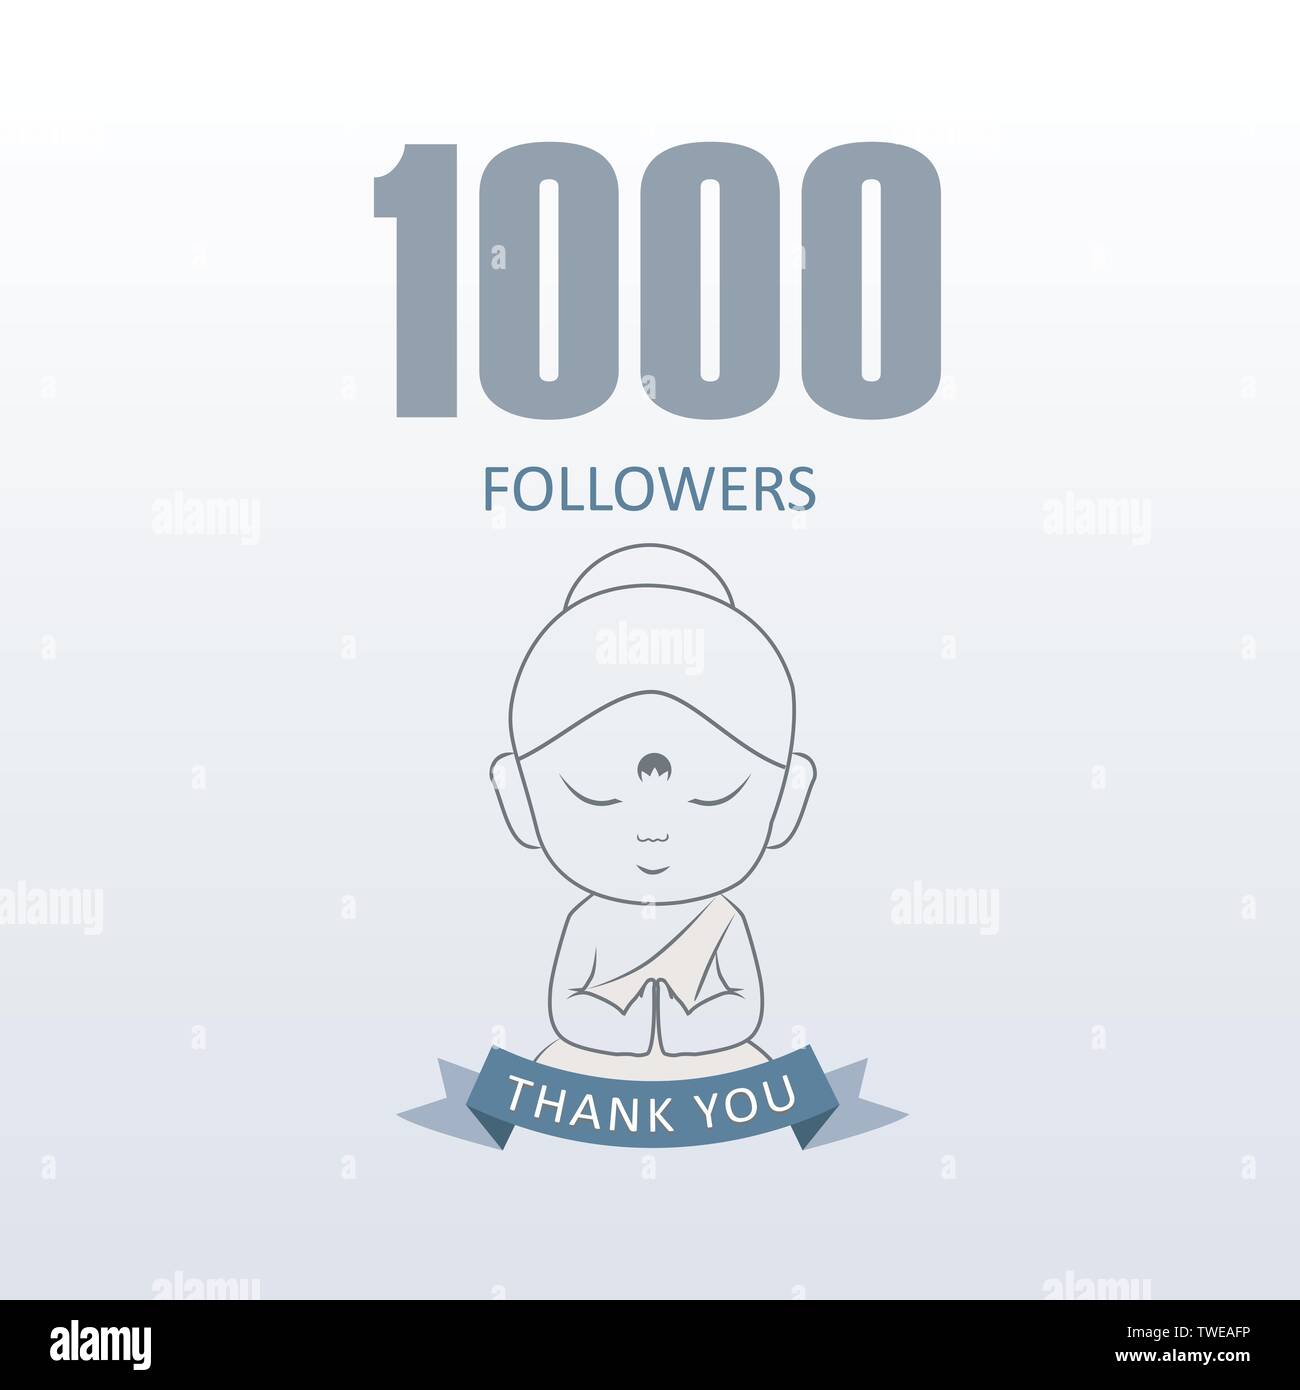 Little Monk showing gratitude for 1000 followers on social media- Thank you from Little Buddha Stock Vector